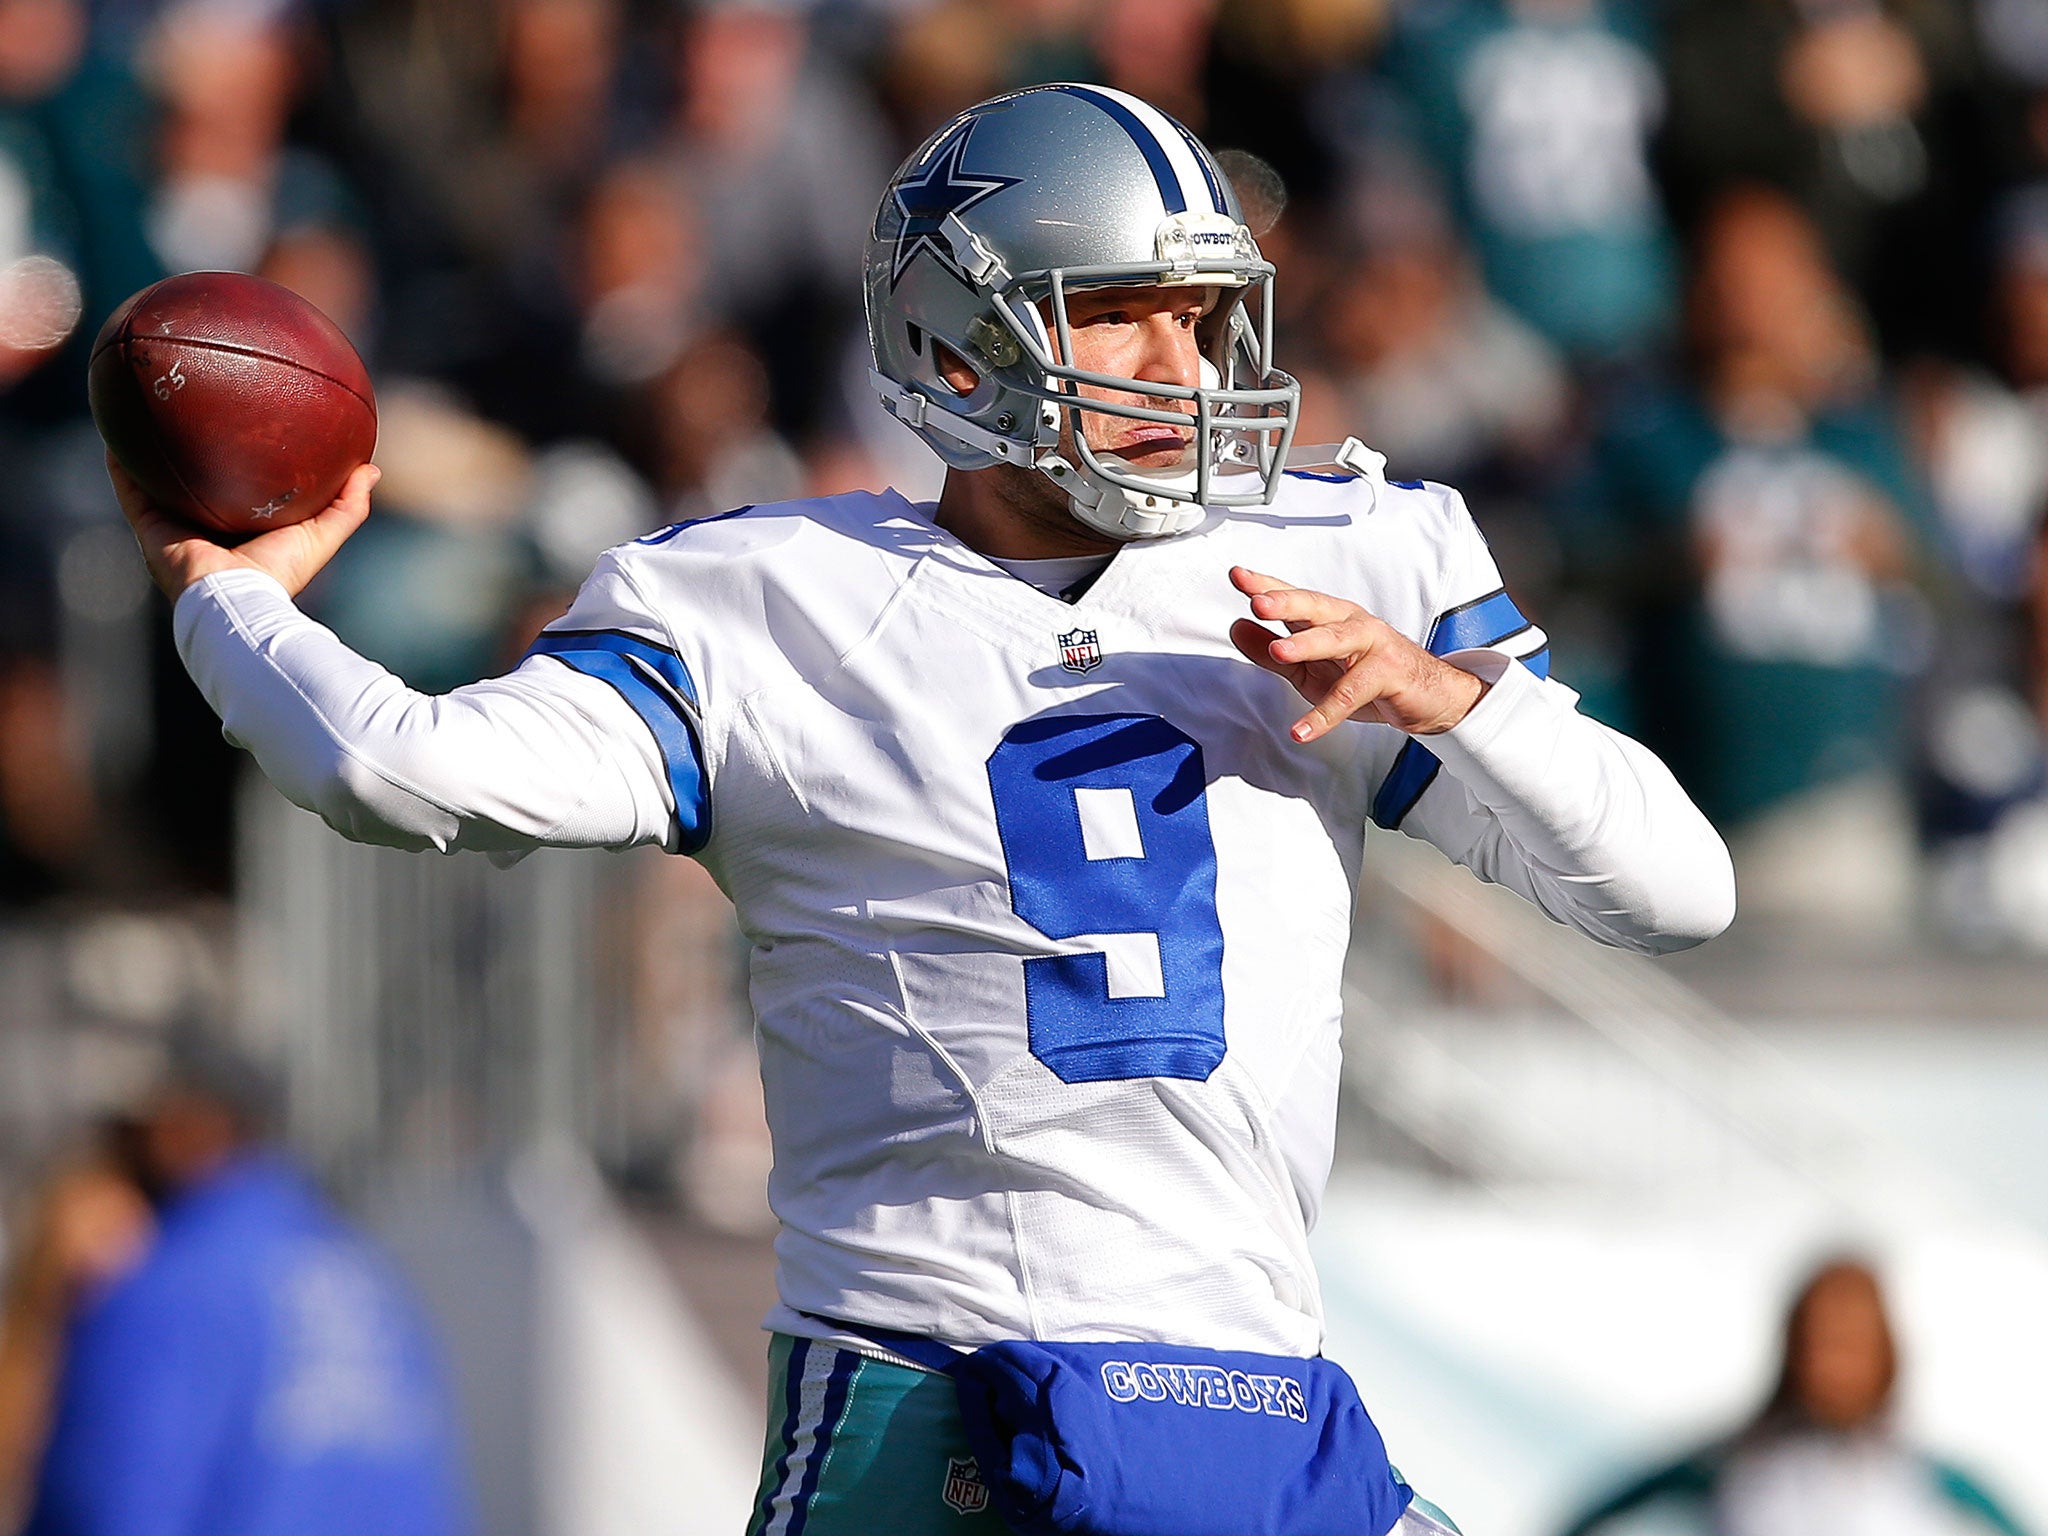 Tony Romo confirmed his retirement from the NFL